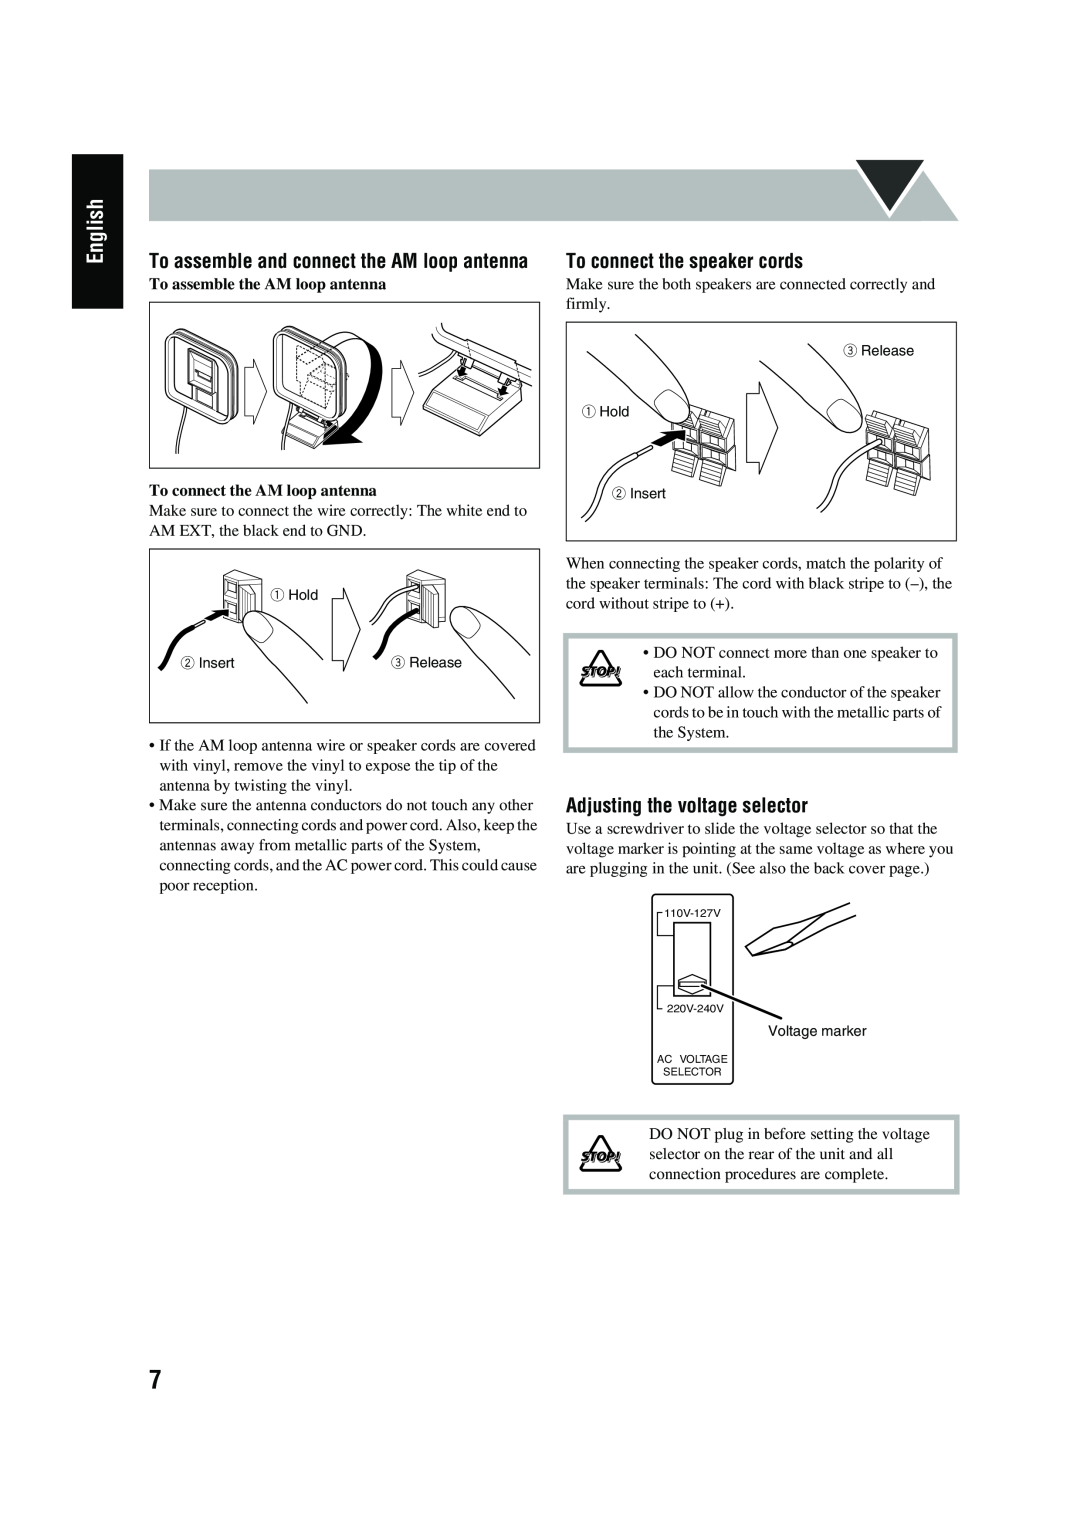 JVC CA-UXG45 manual English, To connect the speaker cords, Adjusting the voltage selector, To assemble the AM loop antenna 